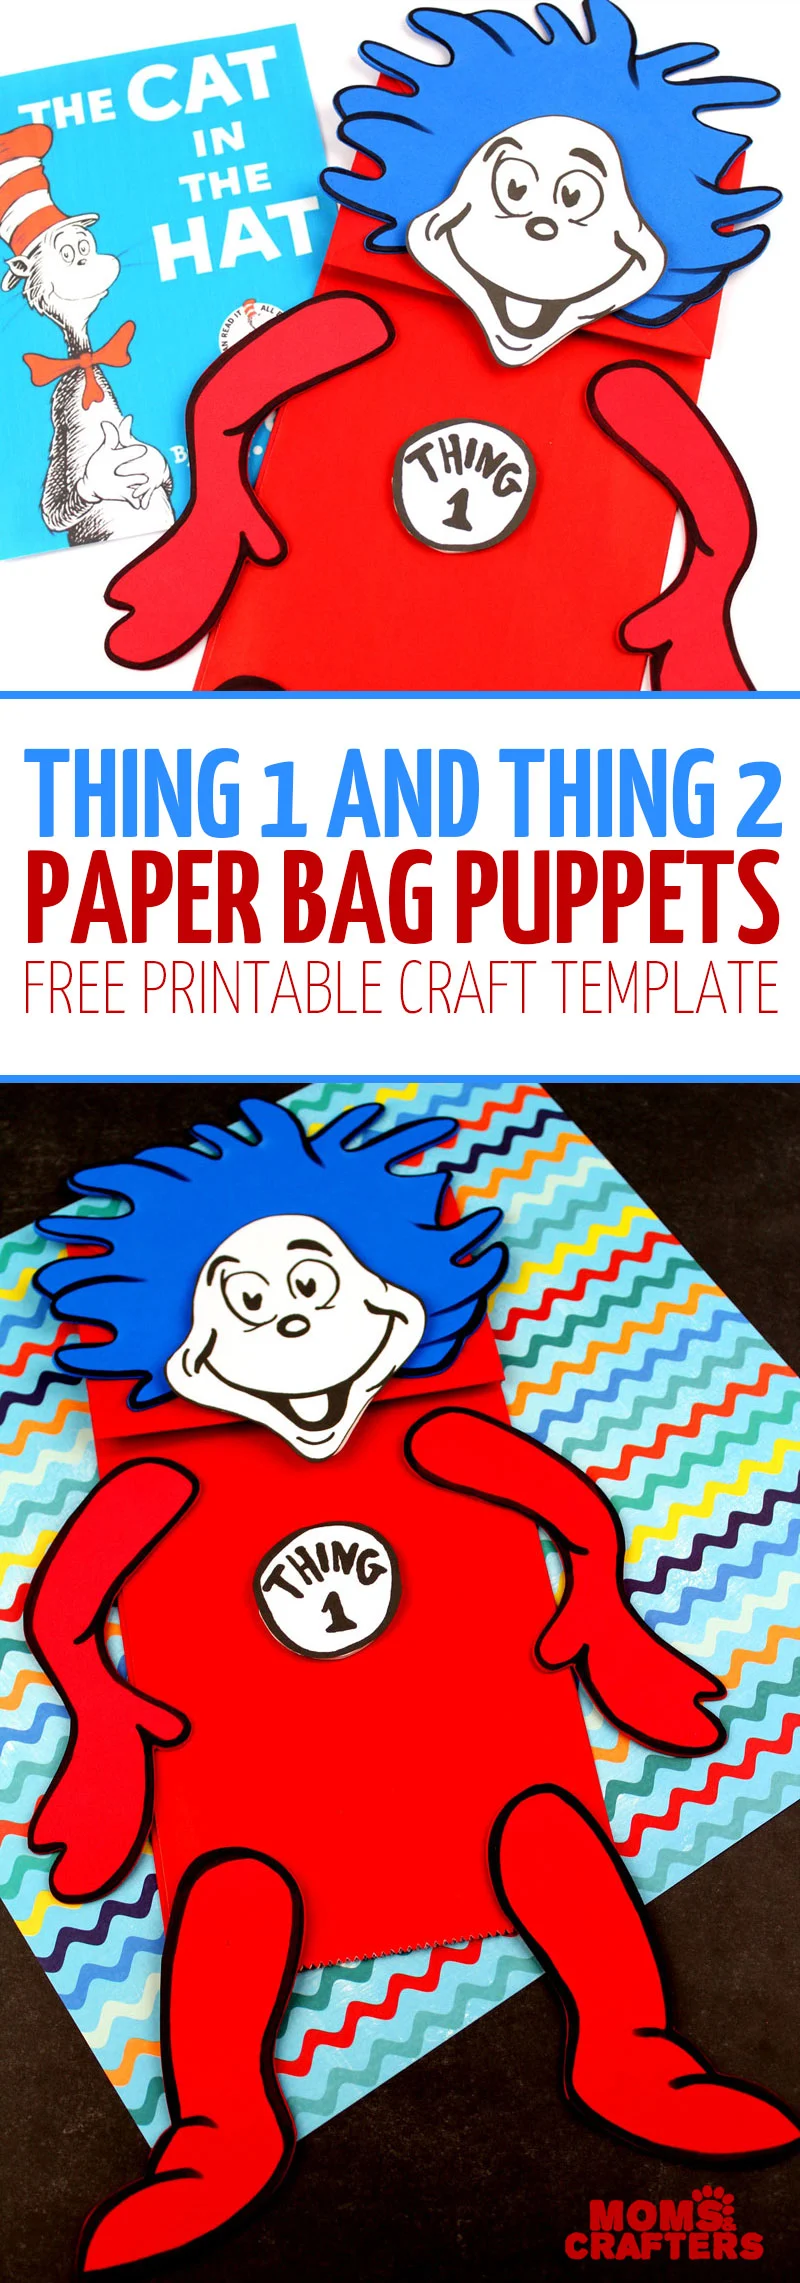 These adorable Thing 1 and Thing 2 puppets are made using a free printable template, craft foam or card stock, lunch bags and that's it! It's the perfect Dr. Seuss Kids craft to go with the book the Cat in the Hat. #literacy #kidscrafts #drseuss